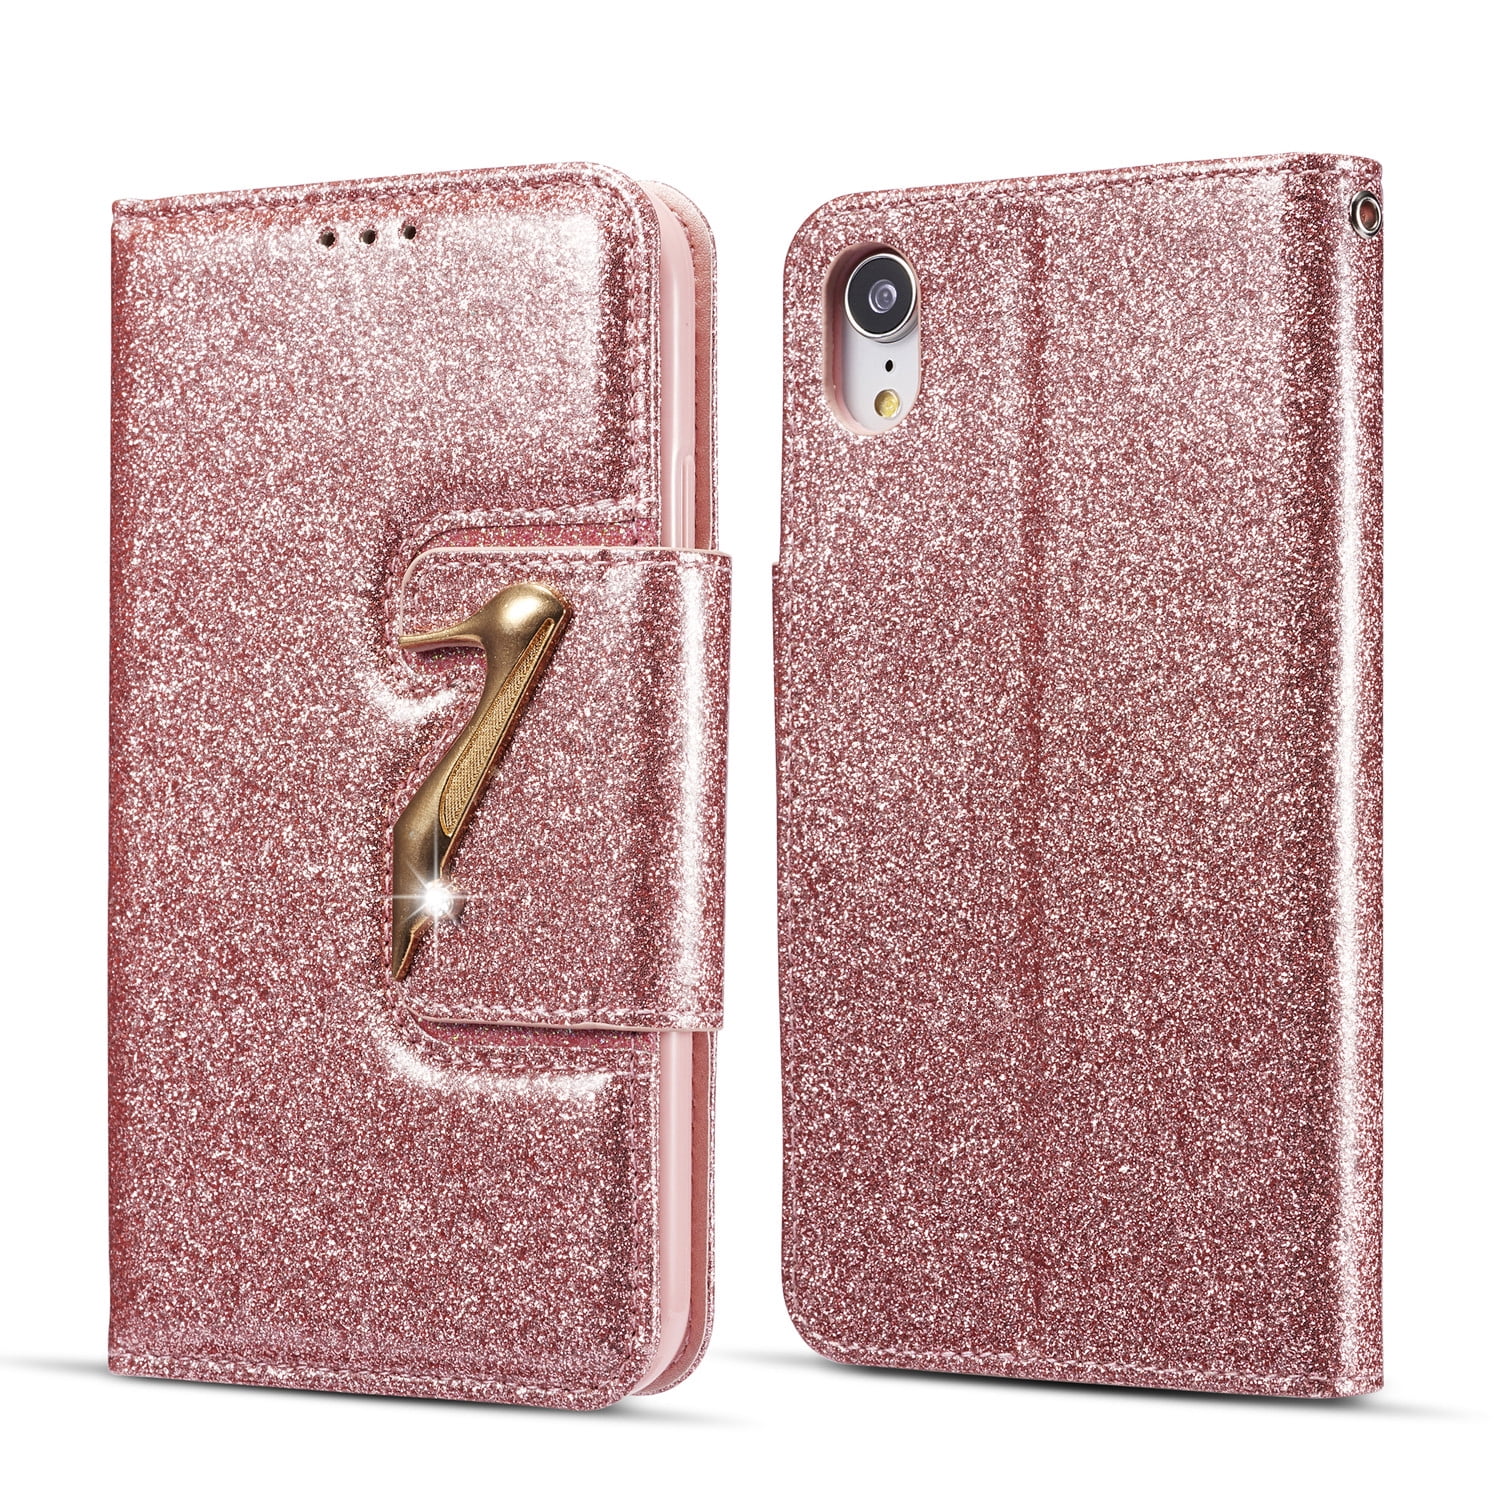 iPhone XR Case Wallet, iPhone XR 2018 Case, Allytech Glitter Bling Leather Cover Folio Credit ...